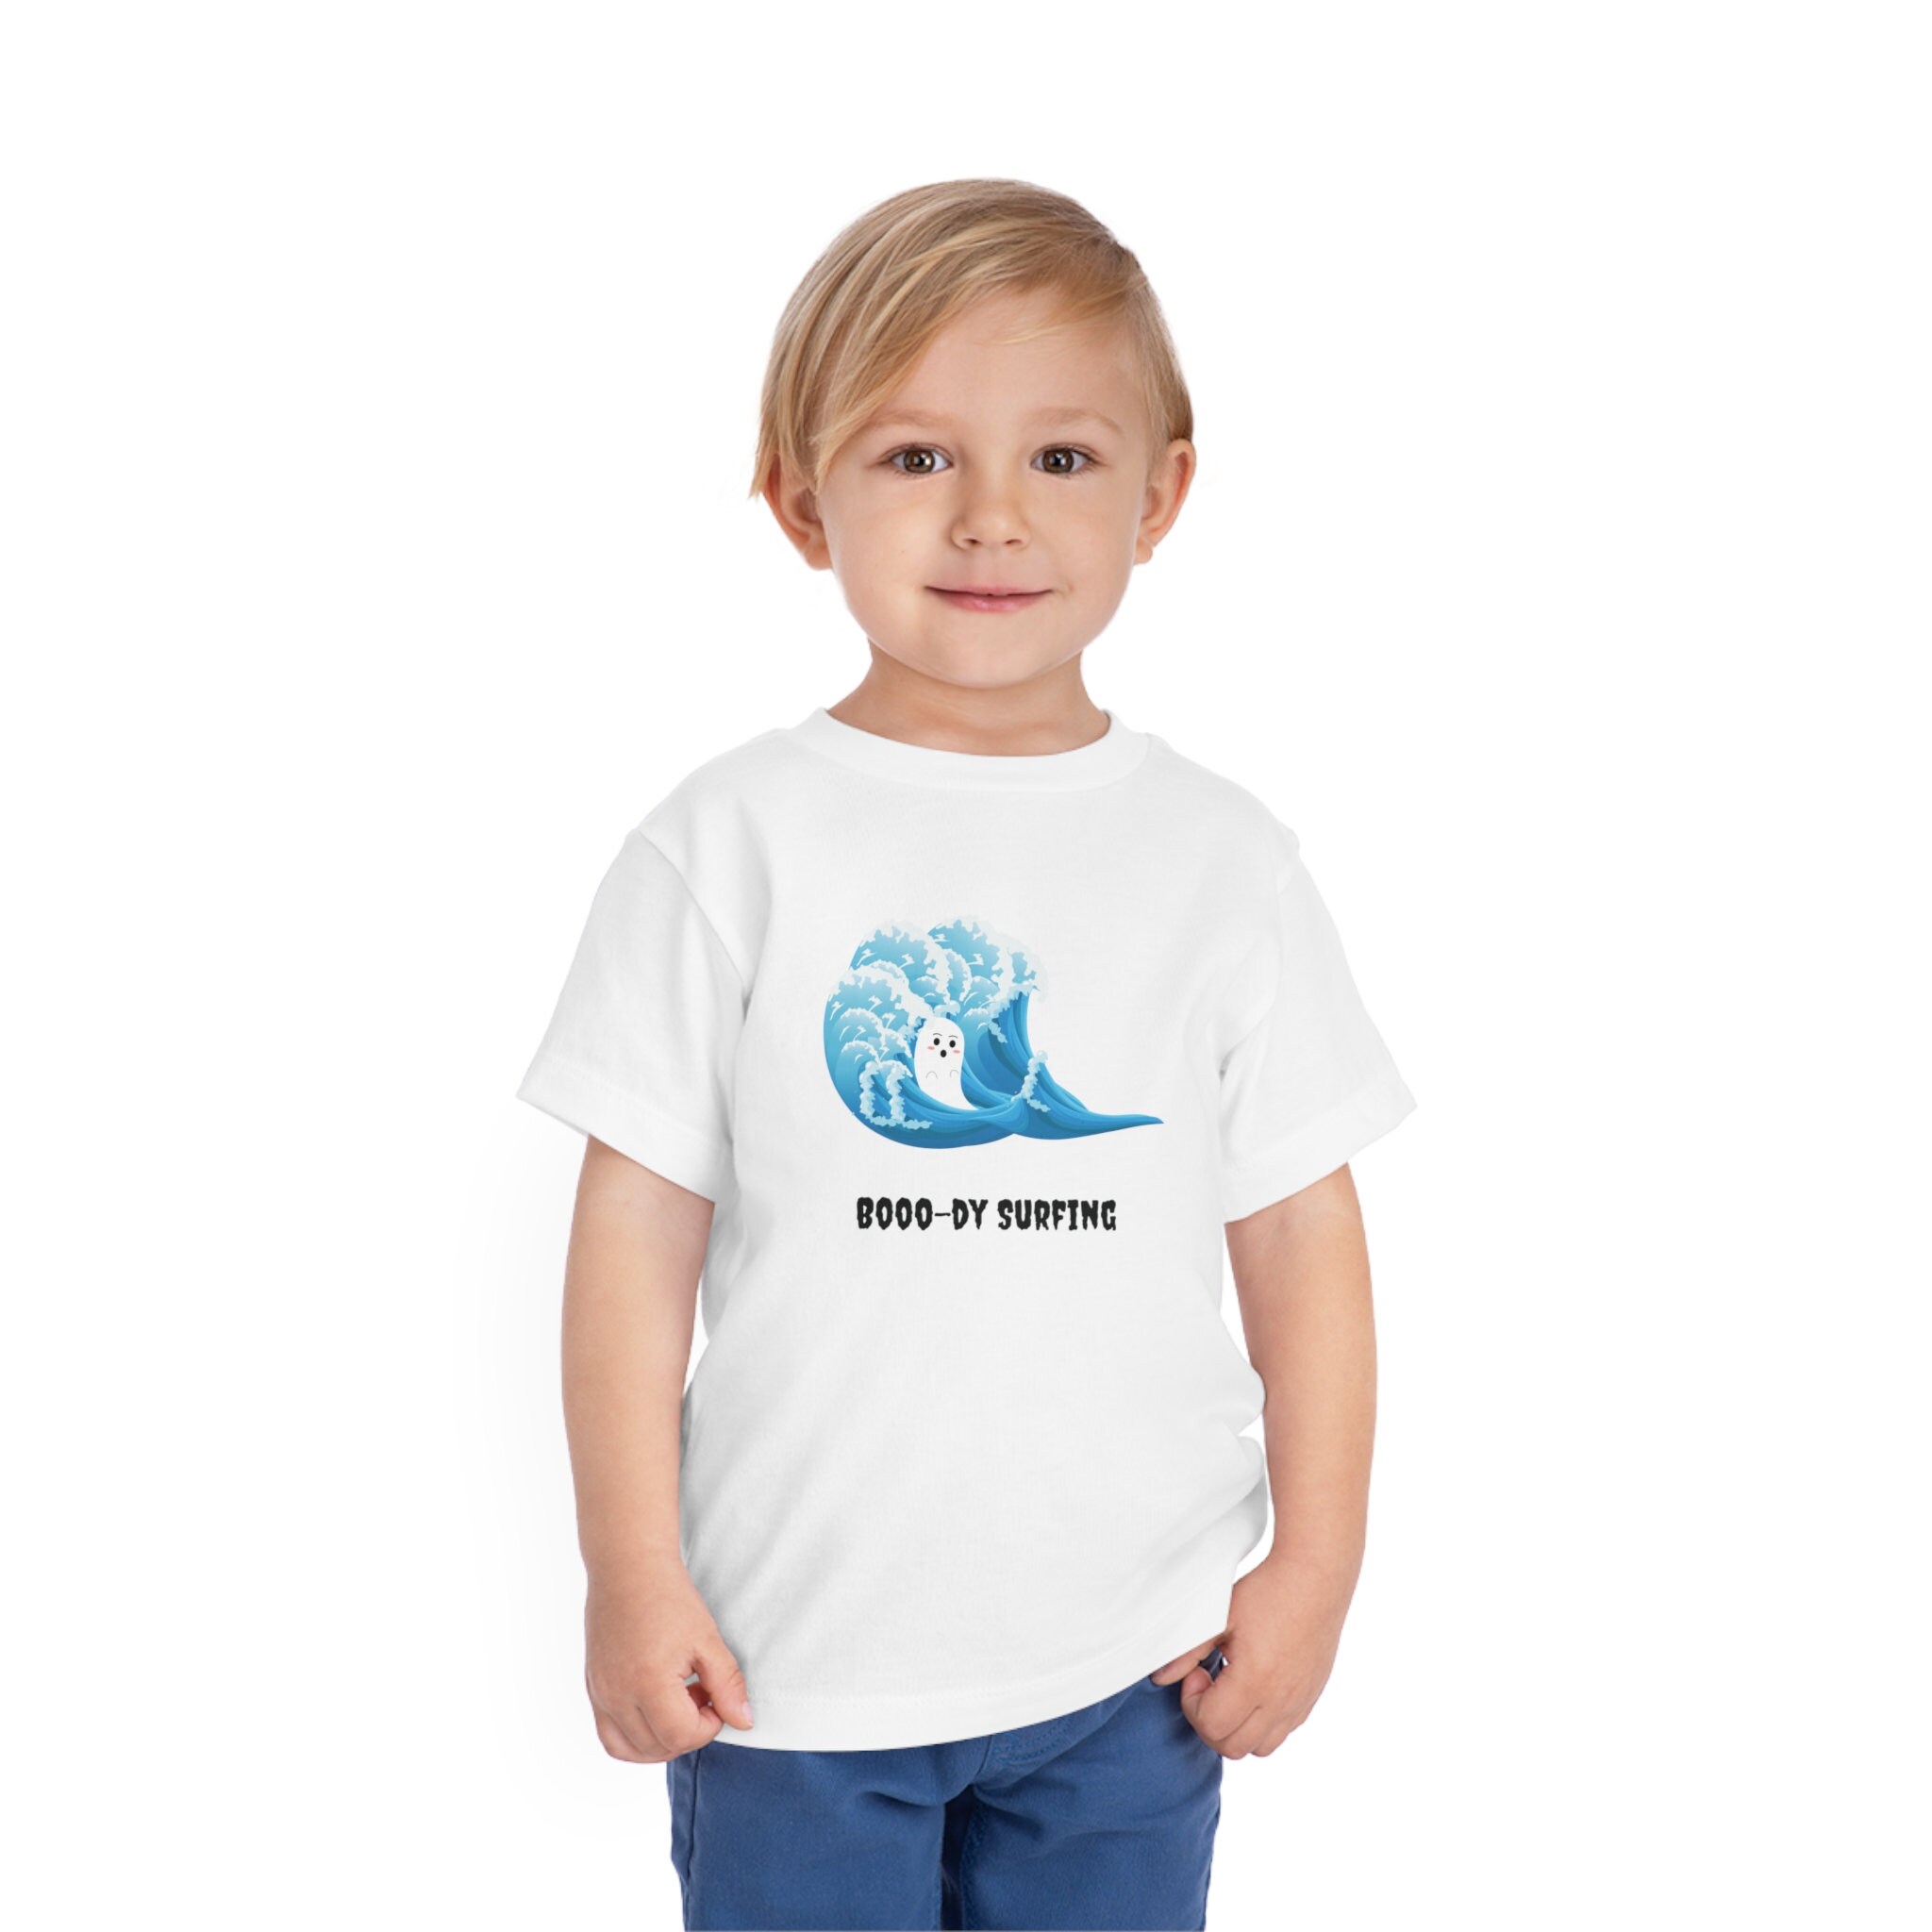 Discover Toddler T-Shirt Short Sleeve T Shirt  Sizes 2T - 5T Gift for Her Gift for Him Gift for Niece Gift for Nephew Ghost Boo-dy Surf Halloween Fun